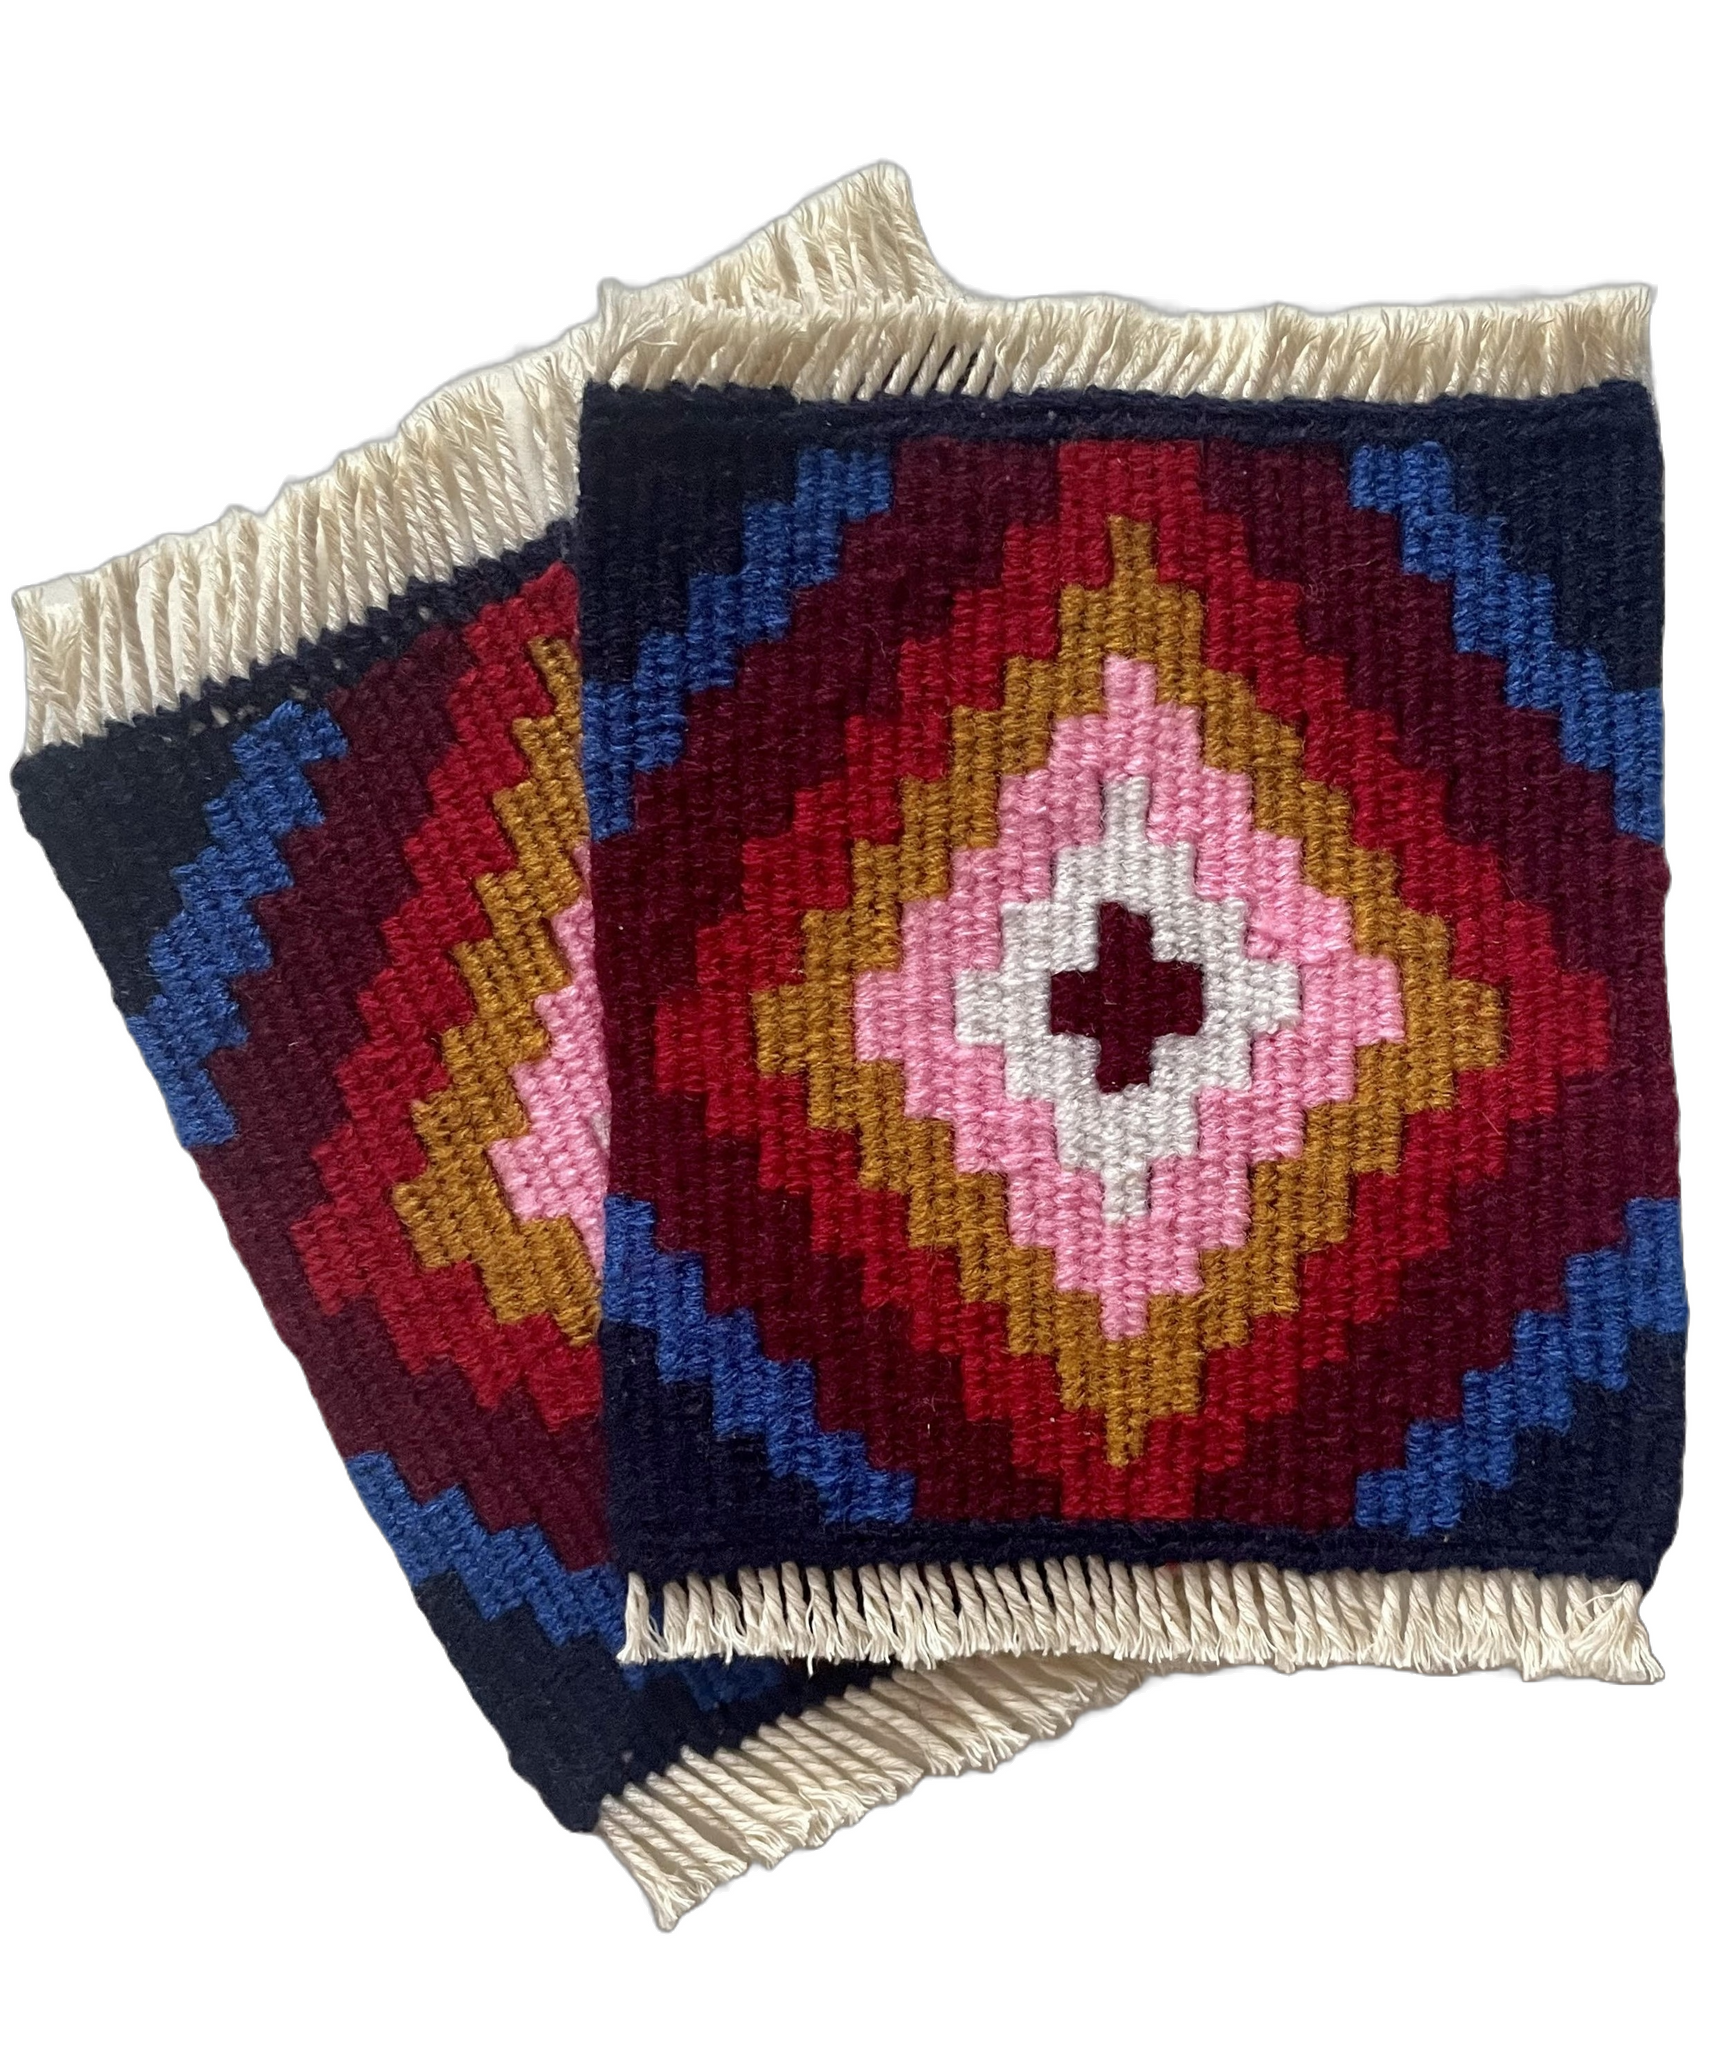 Made in Artsakh Set of 4 Woven Coasters